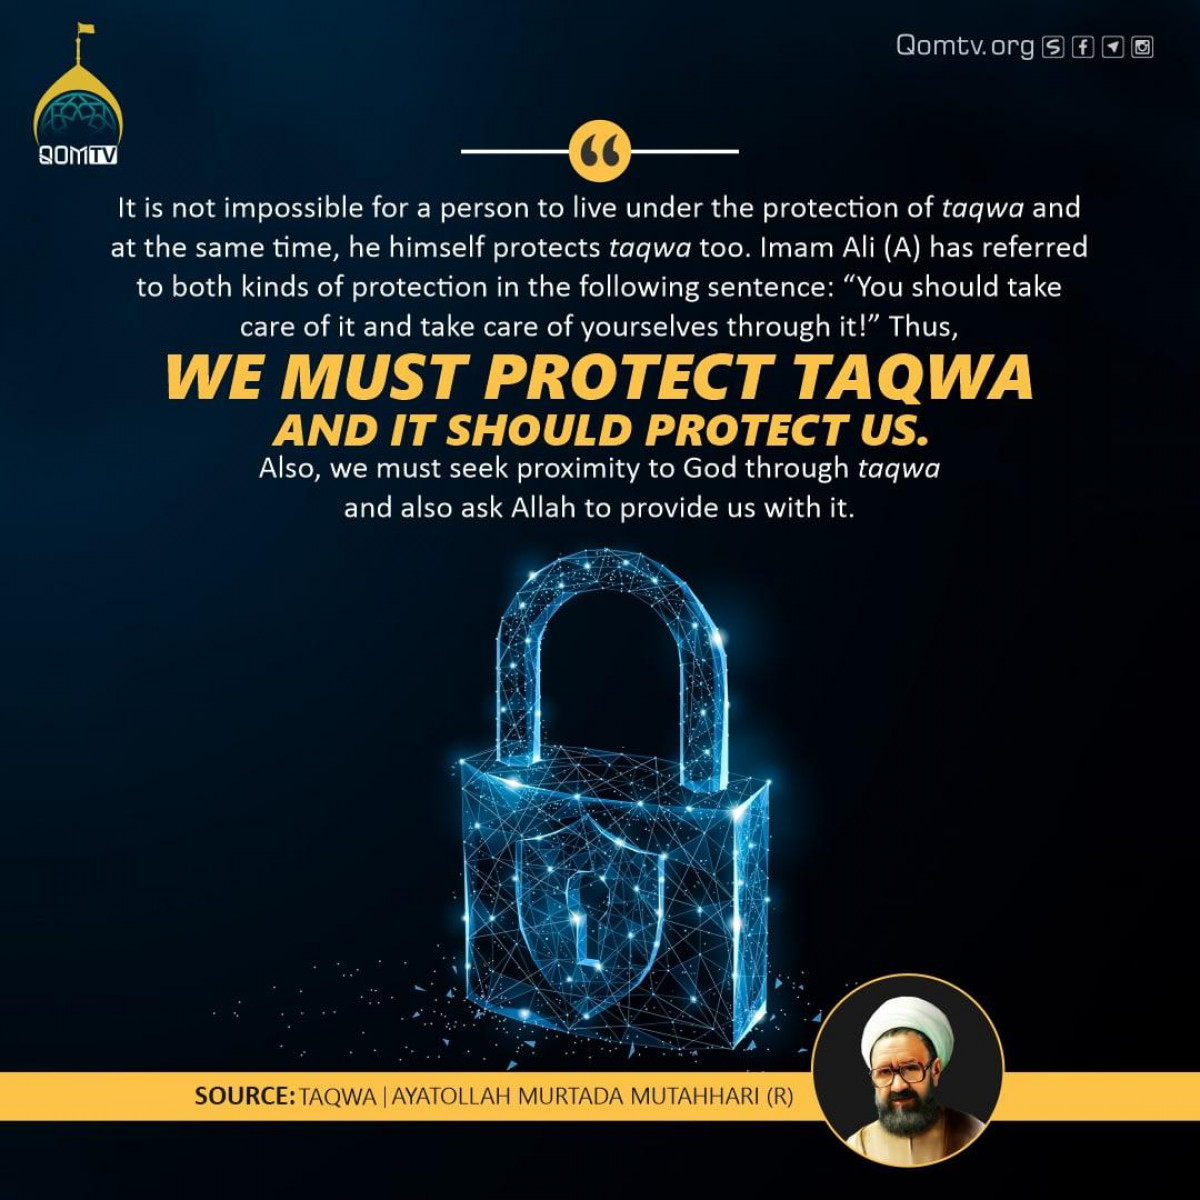 It is not impossible for a person to live under the protection of taqwa and at the same time, he himself protects taqwa too